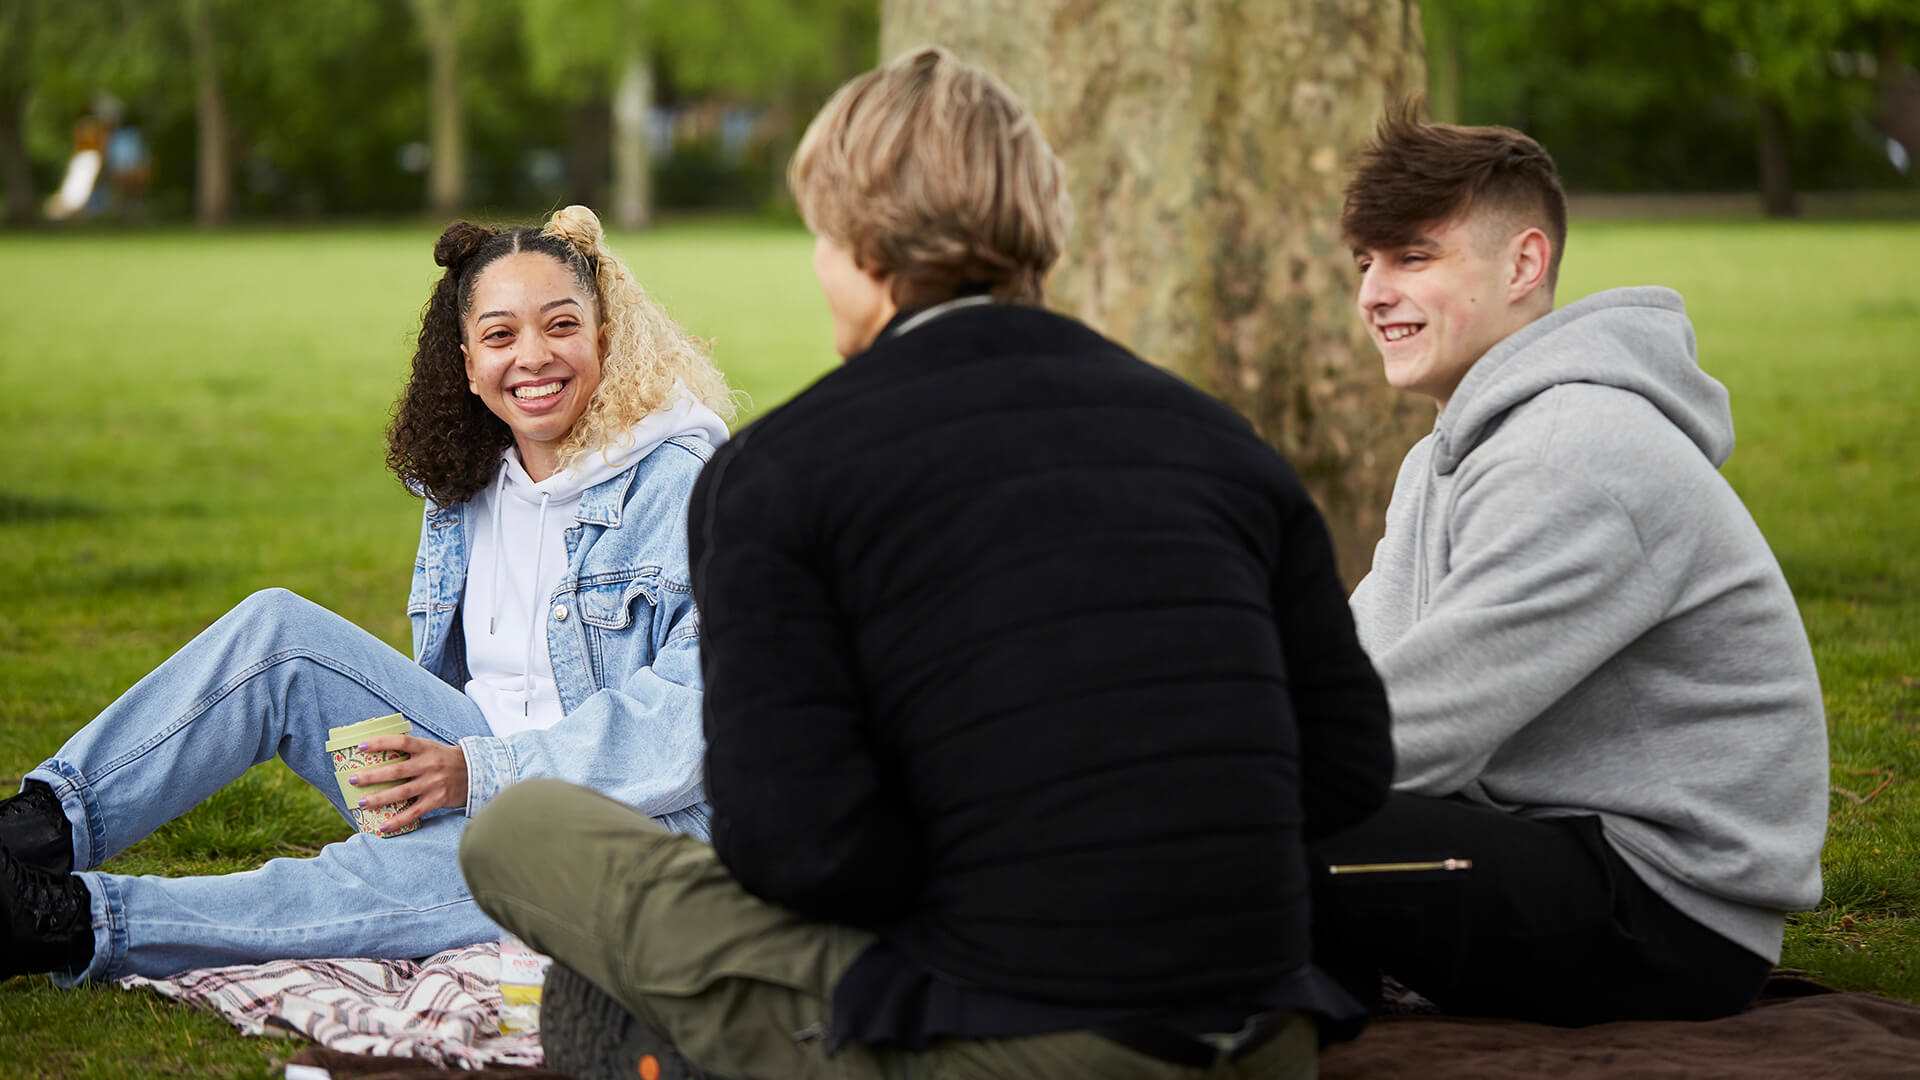 A-group-of-three-young-people-laughing-while-sitting-on-the-ground-beside-a-tree-in-the-park